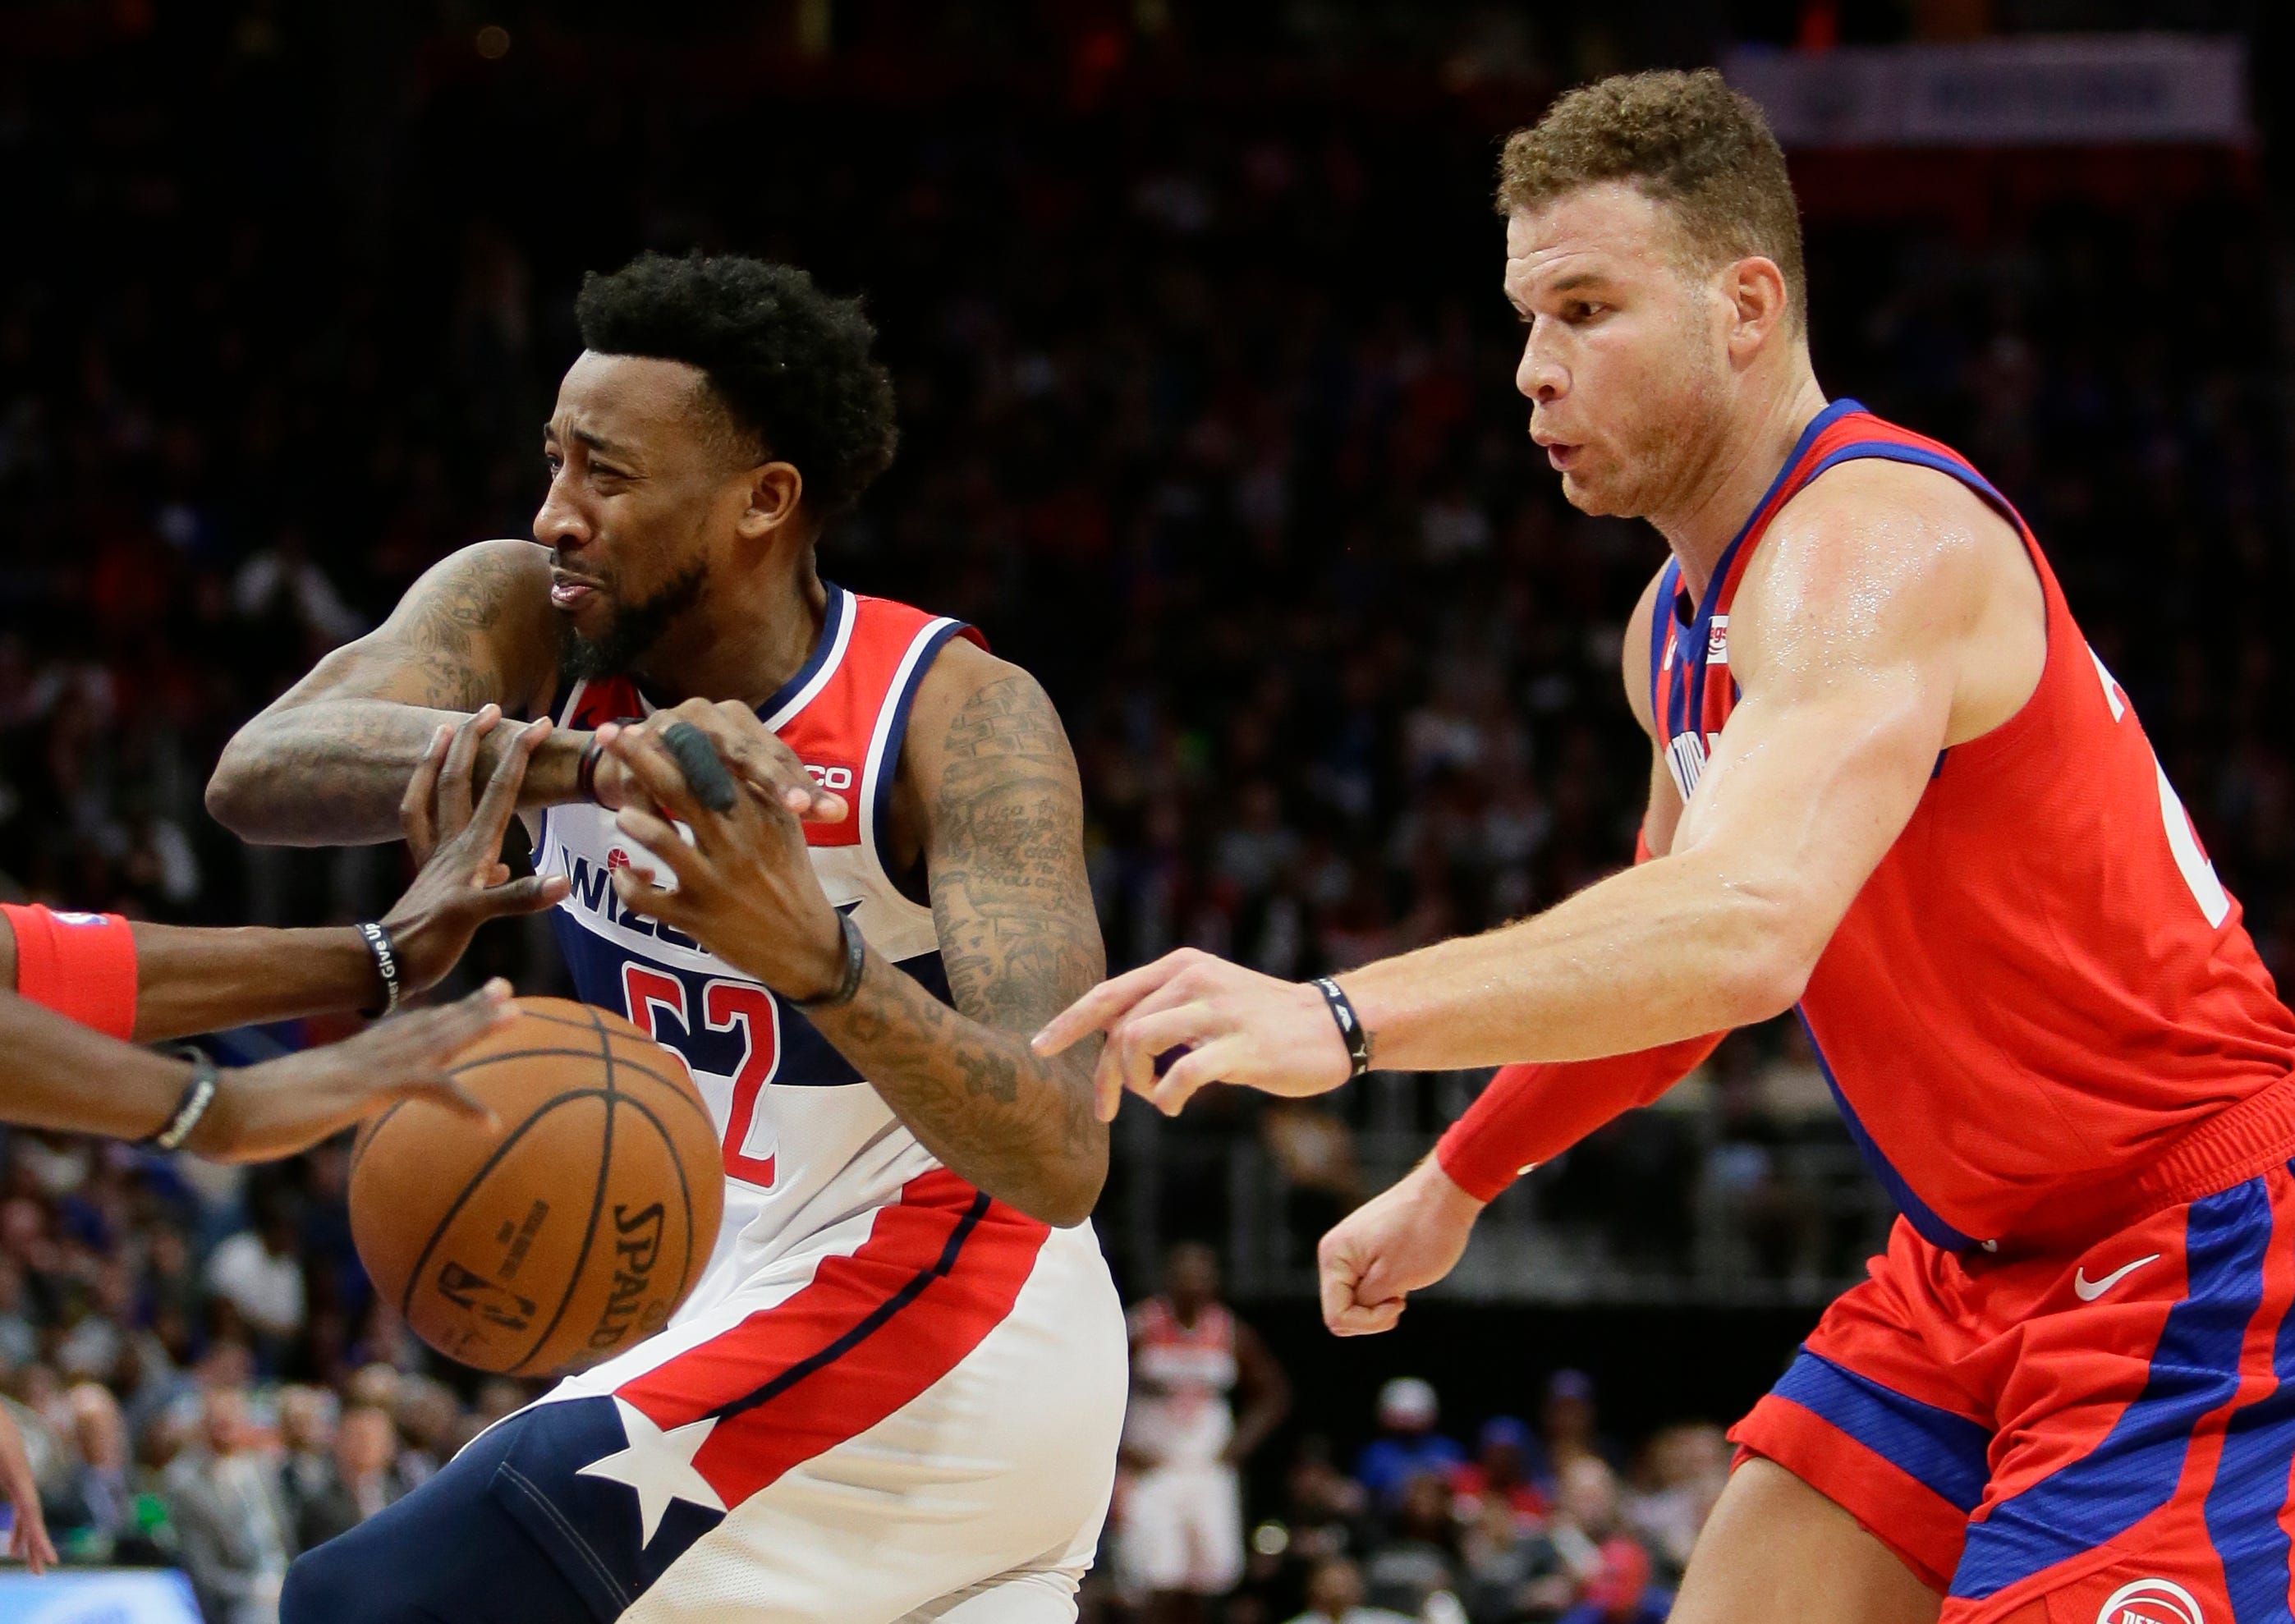 Washington Wizards guard Jordan McRae (52) has the ball knocked away by Detroit Pistons forward Blake Griffin, right, during the second half.